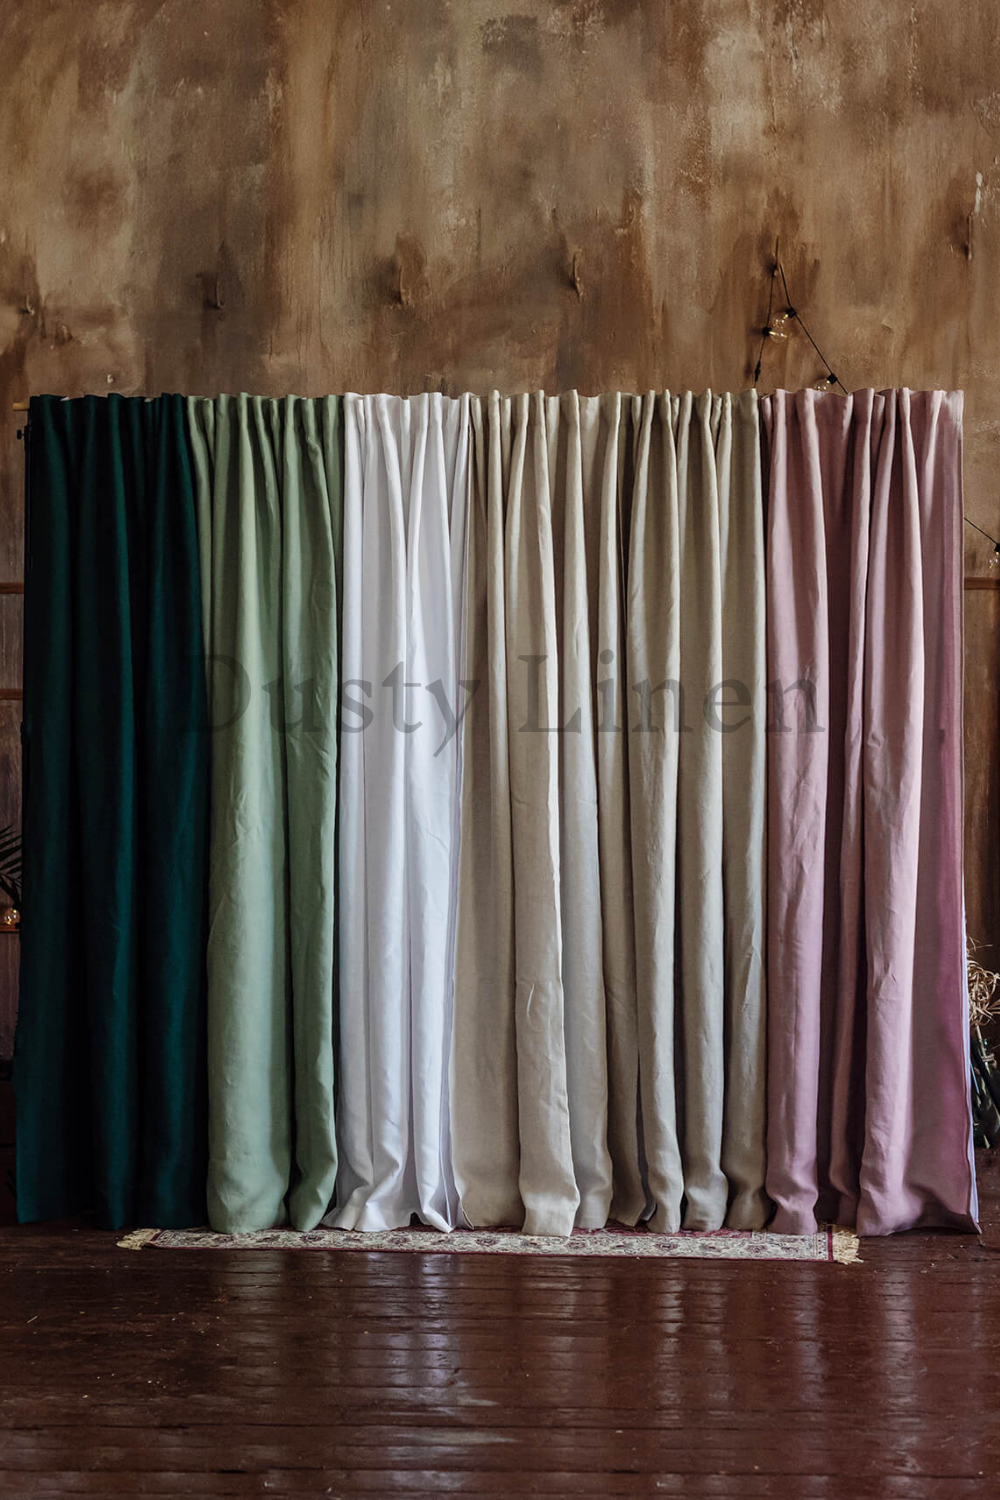 Luxury home style. Best linen shower curtain in white, natural light, beige, sage green, dusty rose, camel brown color. Minimalist shower curtain.